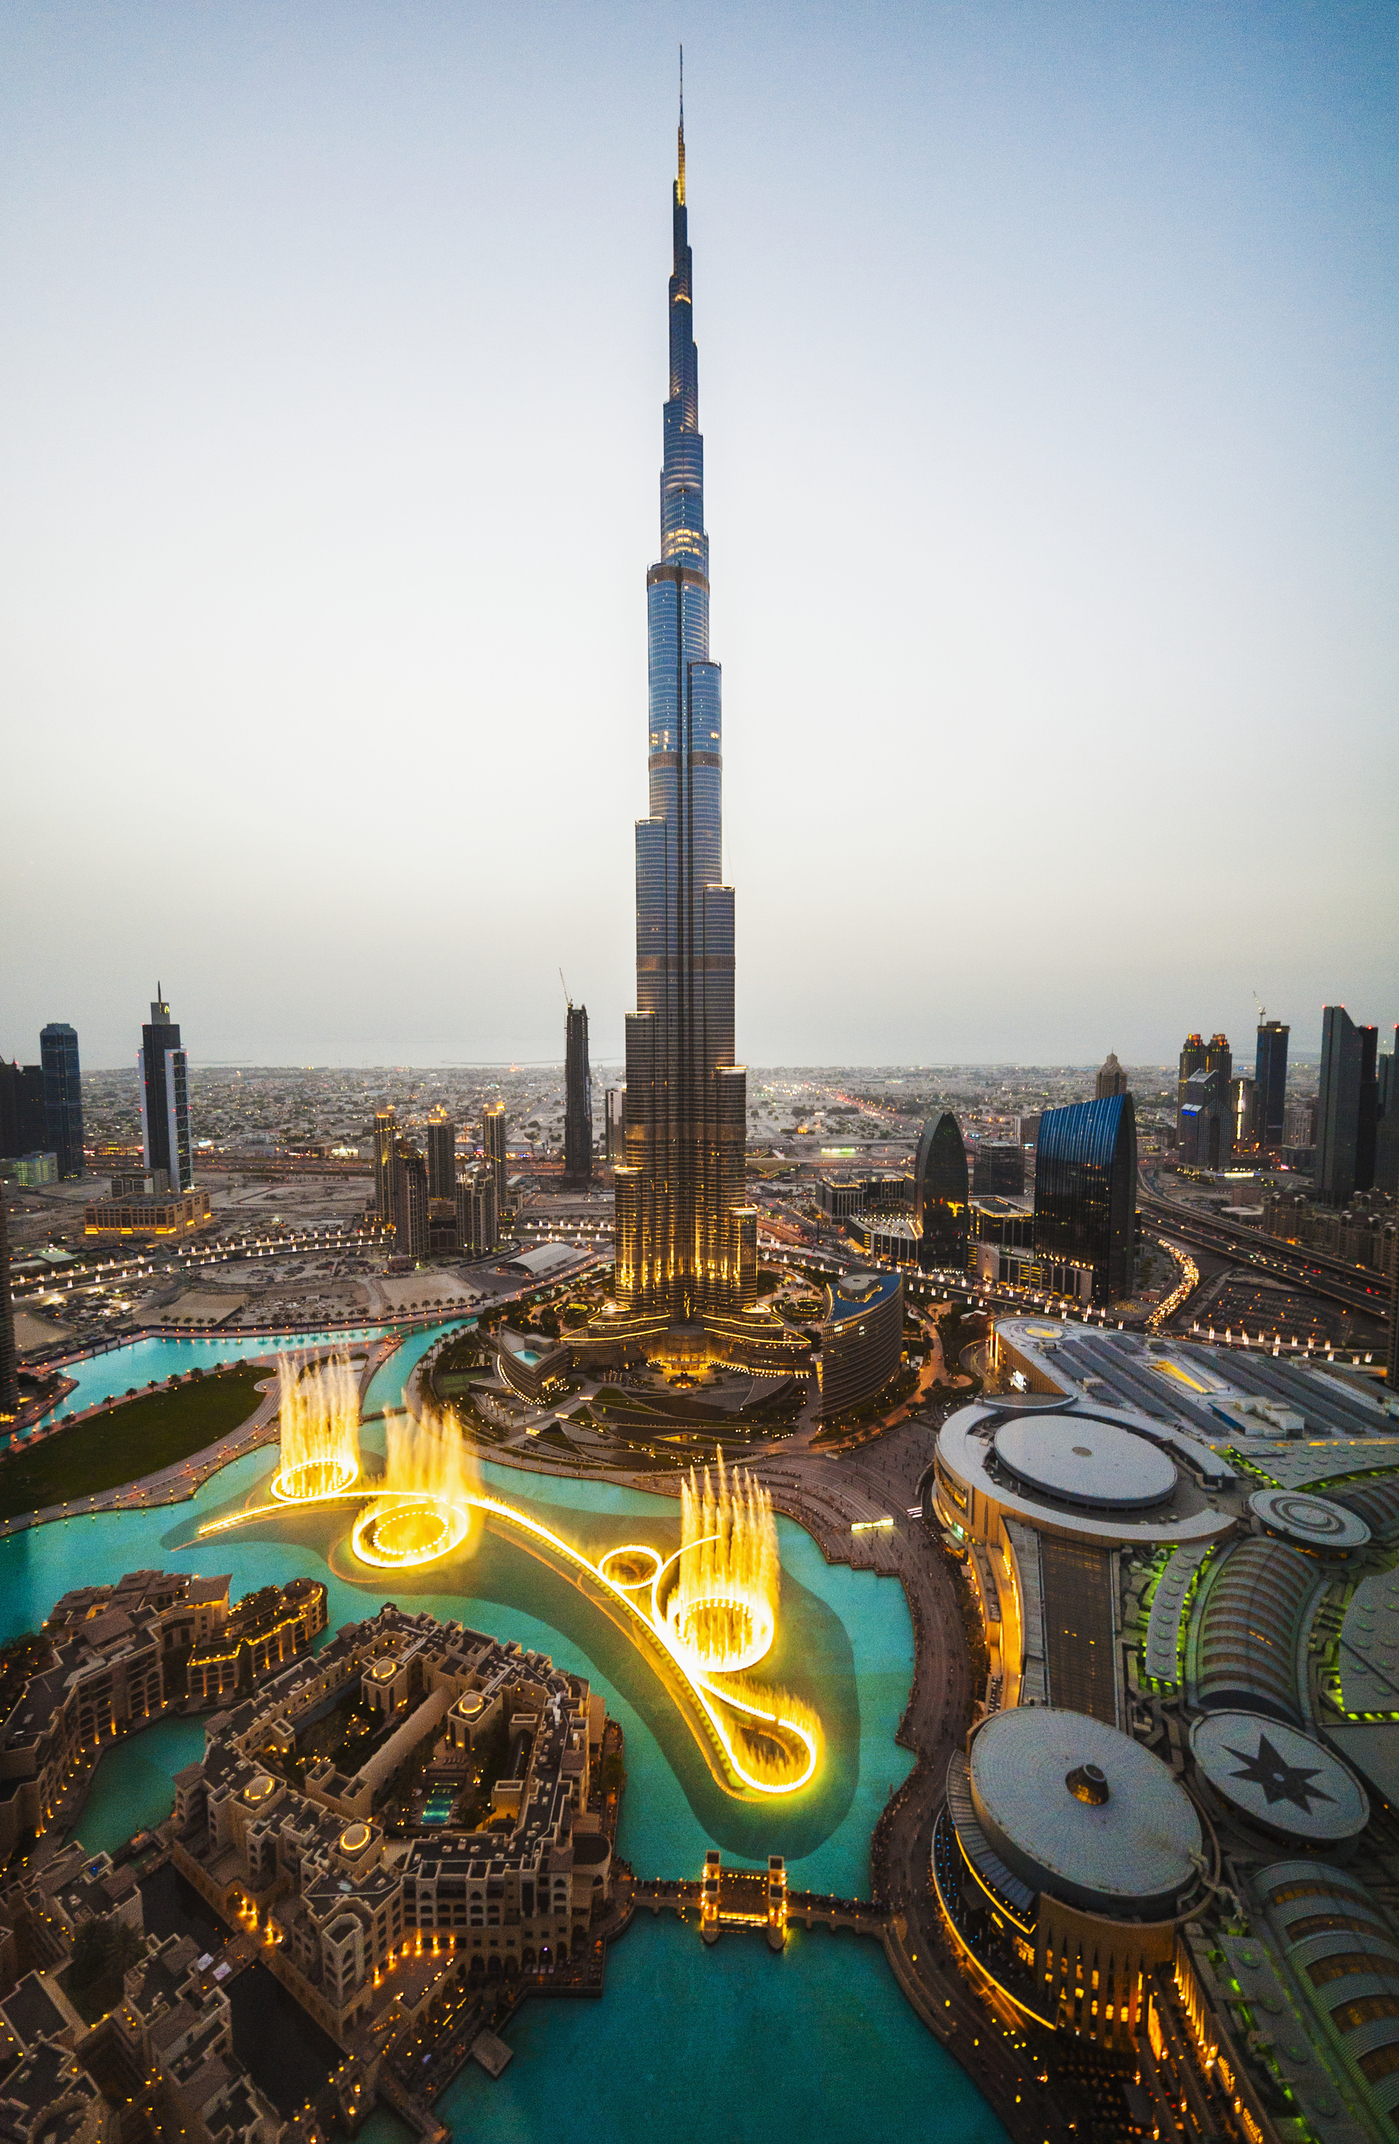 Aerial view of the Burj Khalifa and surrounding illuminated water features at dusk